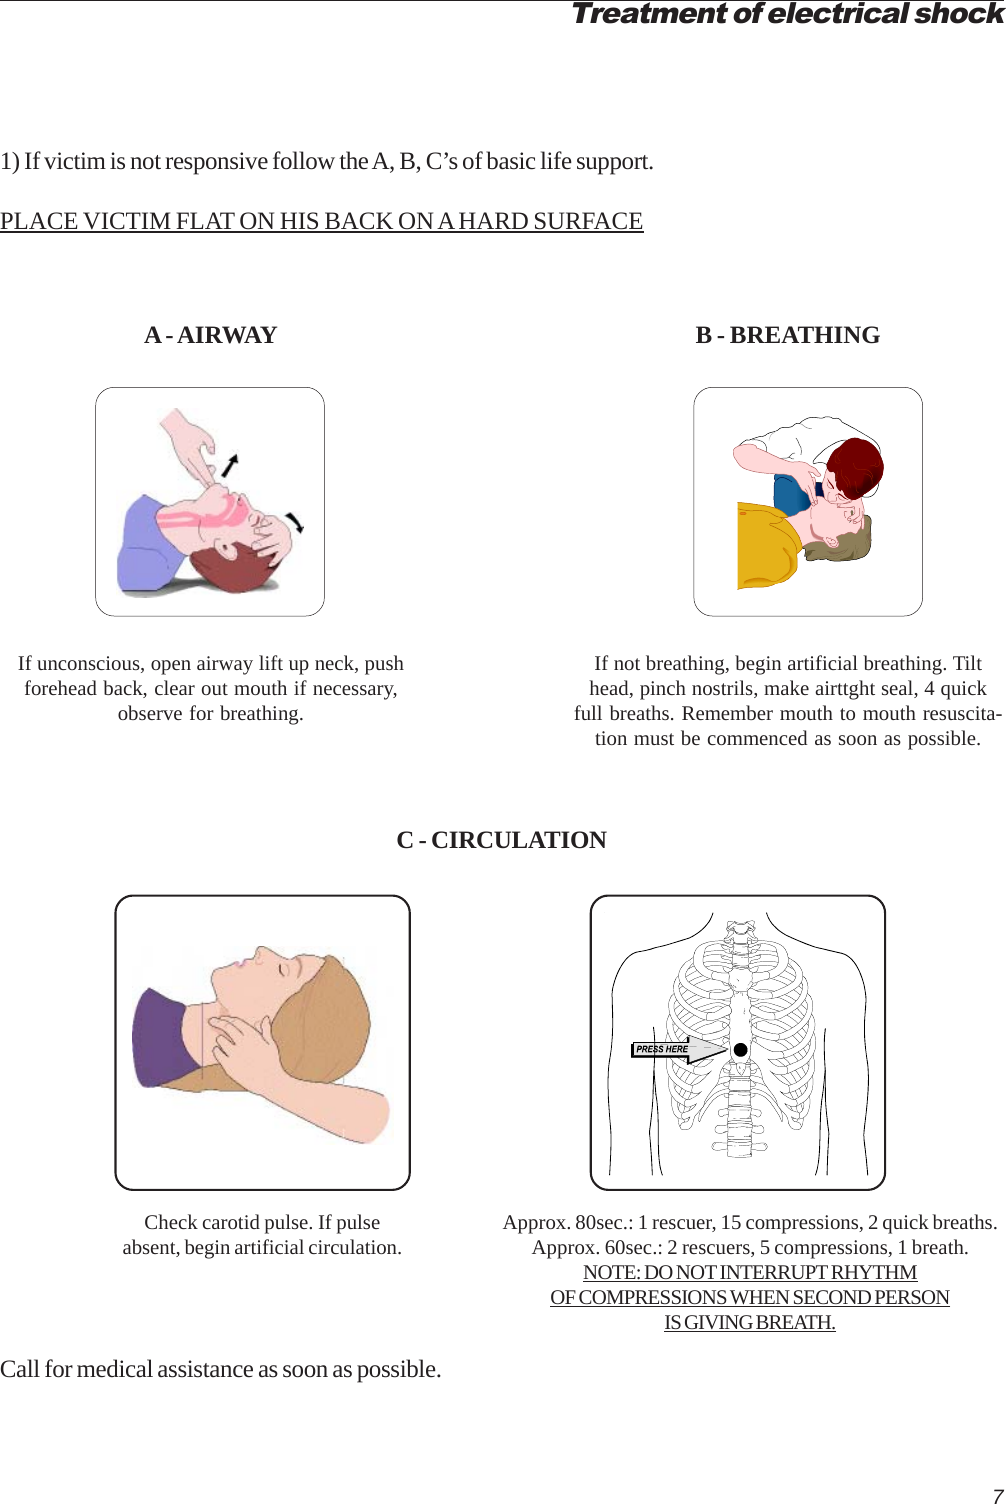 7A - AIRWAYIf unconscious, open airway lift up neck, pushforehead back, clear out mouth if necessary,observe for breathing.Treatment of electrical shock1) If victim is not responsive follow the A, B, C’s of basic life support.PLACE VICTIM FLAT ON HIS BACK ON A HARD SURFACEB - BREATHINGIf not breathing, begin artificial breathing. Tilthead, pinch nostrils, make airttght seal, 4 quickfull breaths. Remember mouth to mouth resuscita-tion must be commenced as soon as possible.C - CIRCULATIONCheck carotid pulse. If pulseabsent, begin artificial circulation.Approx. 80sec.: 1 rescuer, 15 compressions, 2 quick breaths.Approx. 60sec.: 2 rescuers, 5 compressions, 1 breath.NOTE: DO NOT INTERRUPT RHYTHMOF COMPRESSIONS WHEN SECOND PERSONIS GIVING BREATH.Call for medical assistance as soon as possible.